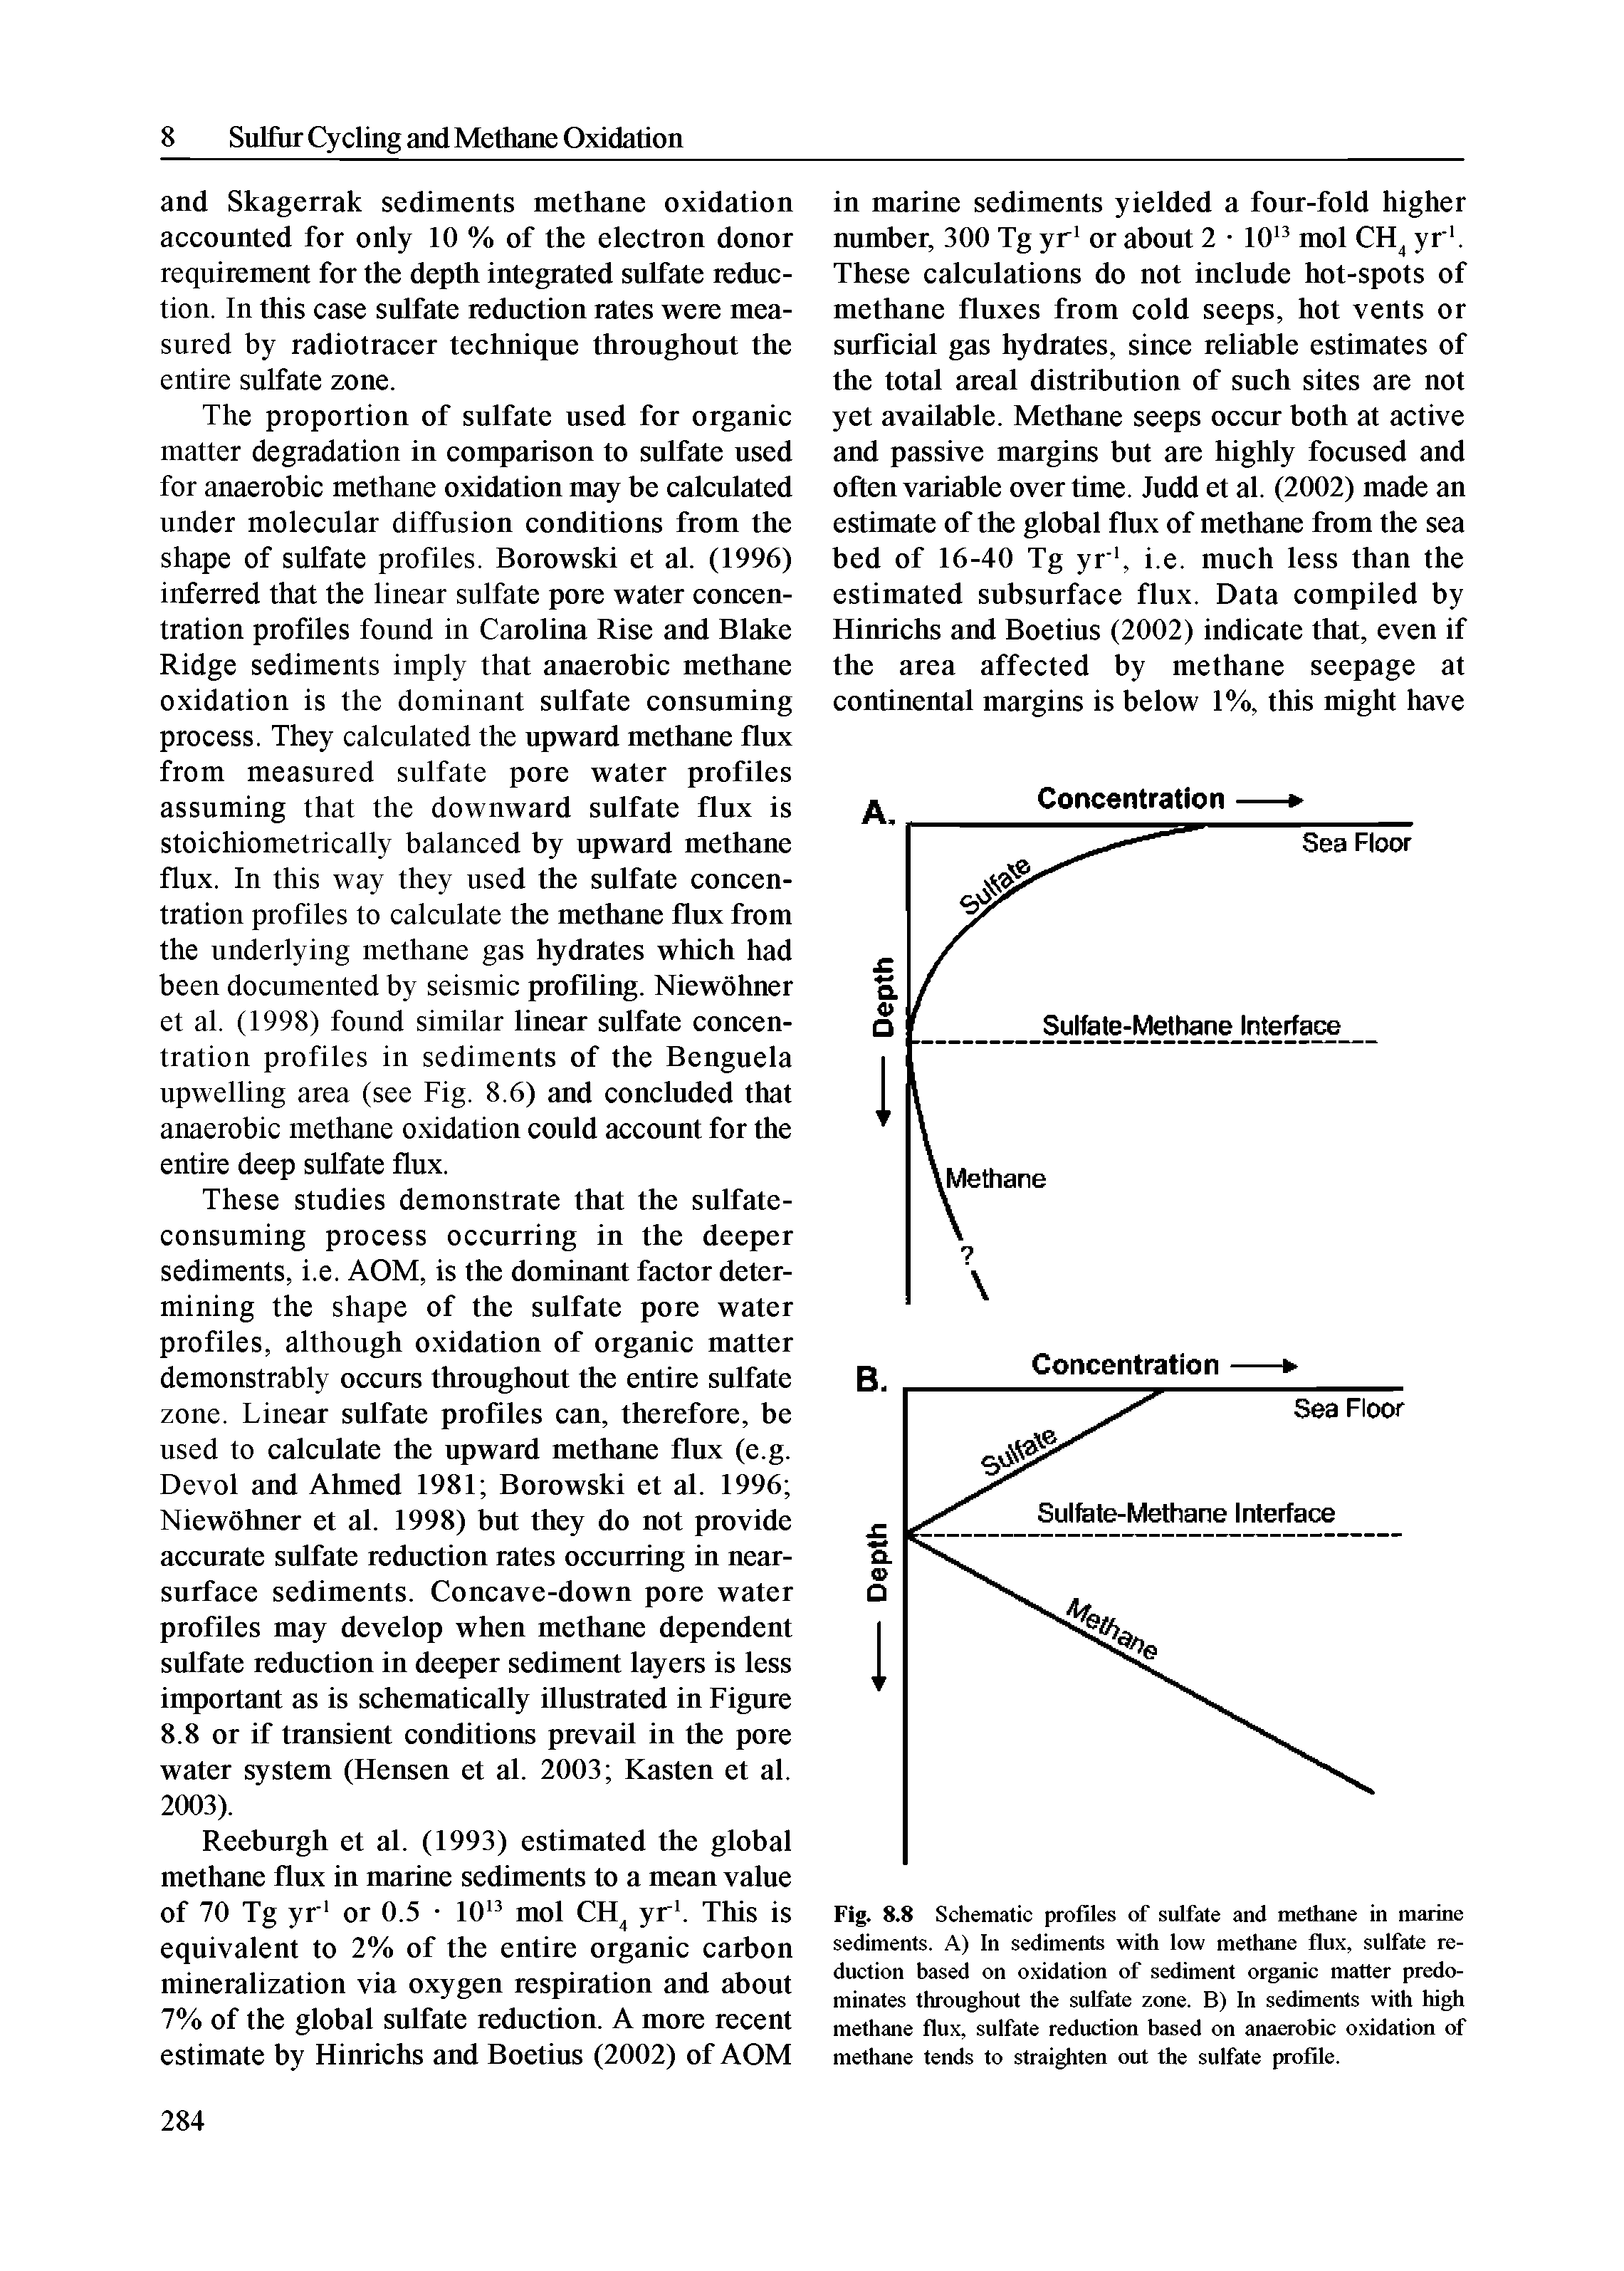 Fig. 8.8 Schematic profiles of sulfate and methane in marine sediments. A) In sediments with low methane flux, sulfate reduction based on oxidation of sediment organic matter predominates throughout the sulfate zone. B) In sediments with high methane flux, sulfate reduction based on anaerobic oxidation of methane tends to straighten out the sulfate profile.